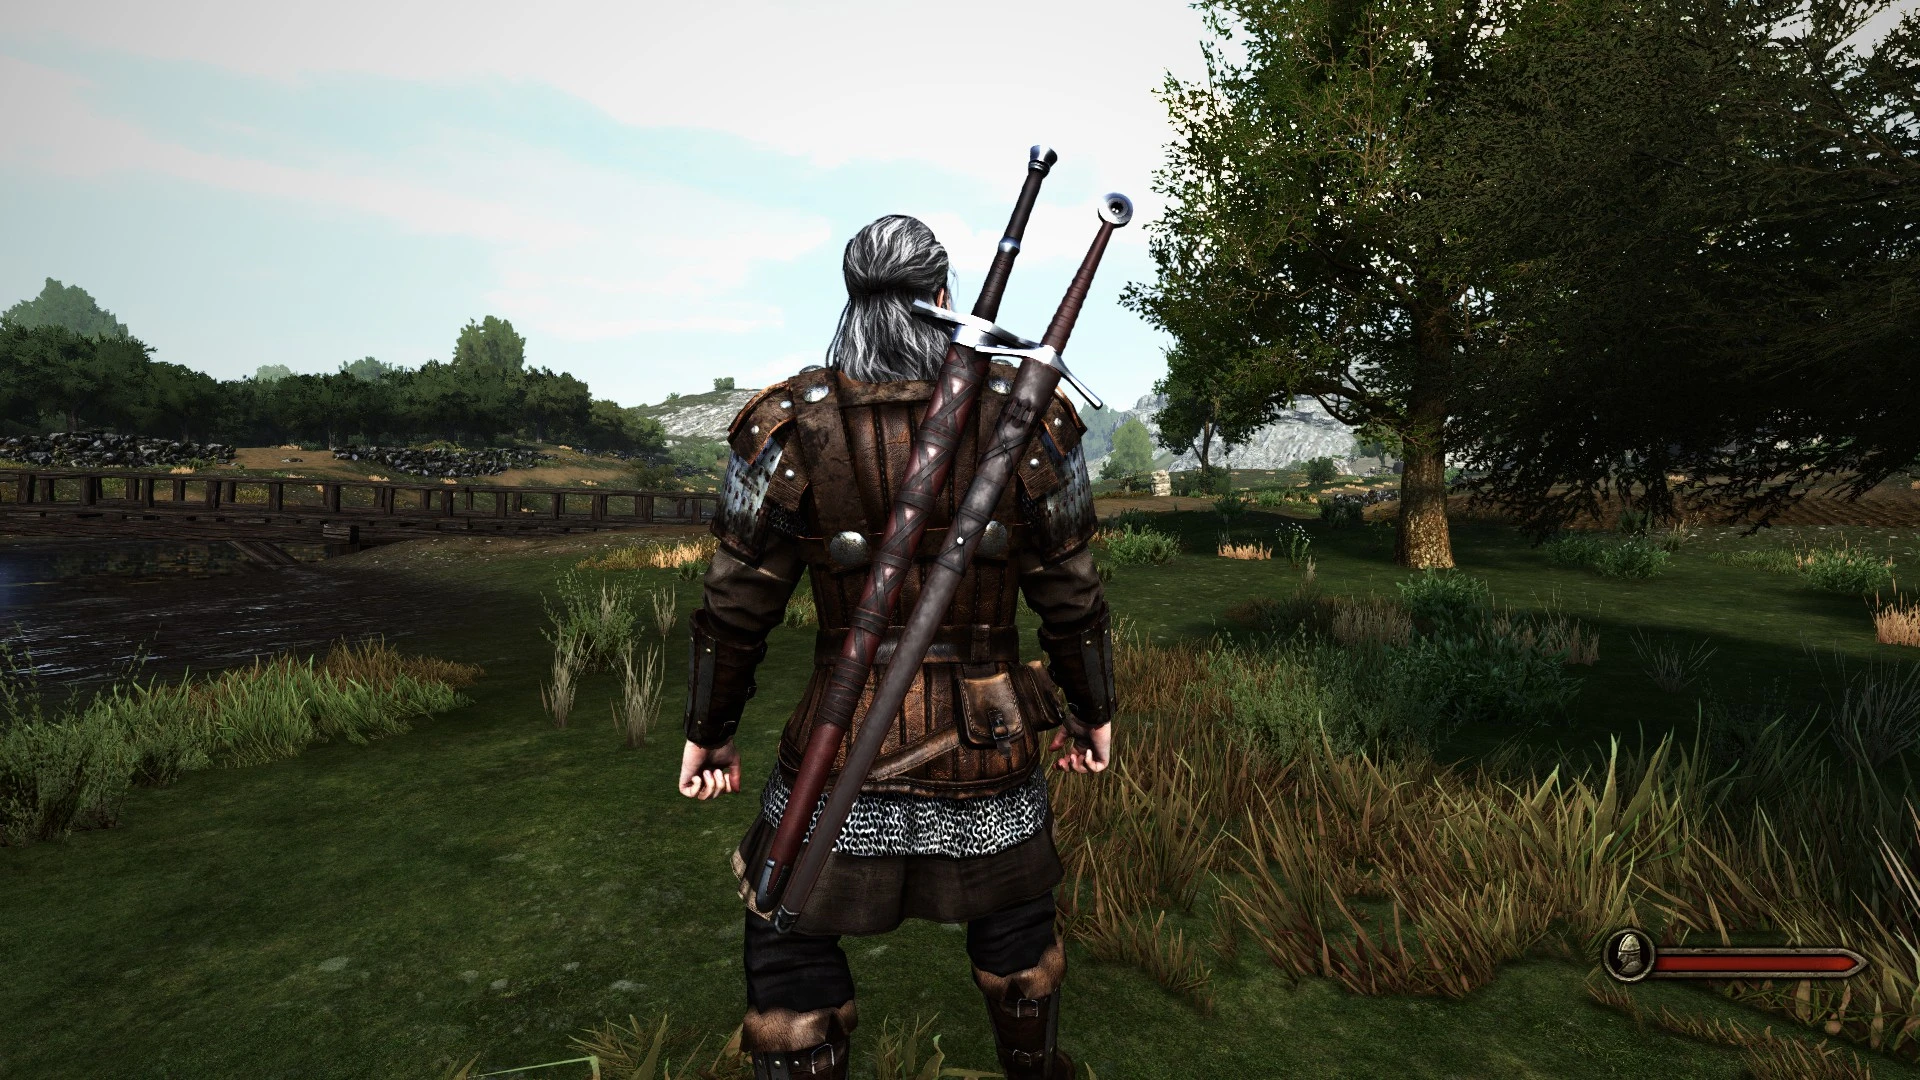 mount blade bannerlord mods